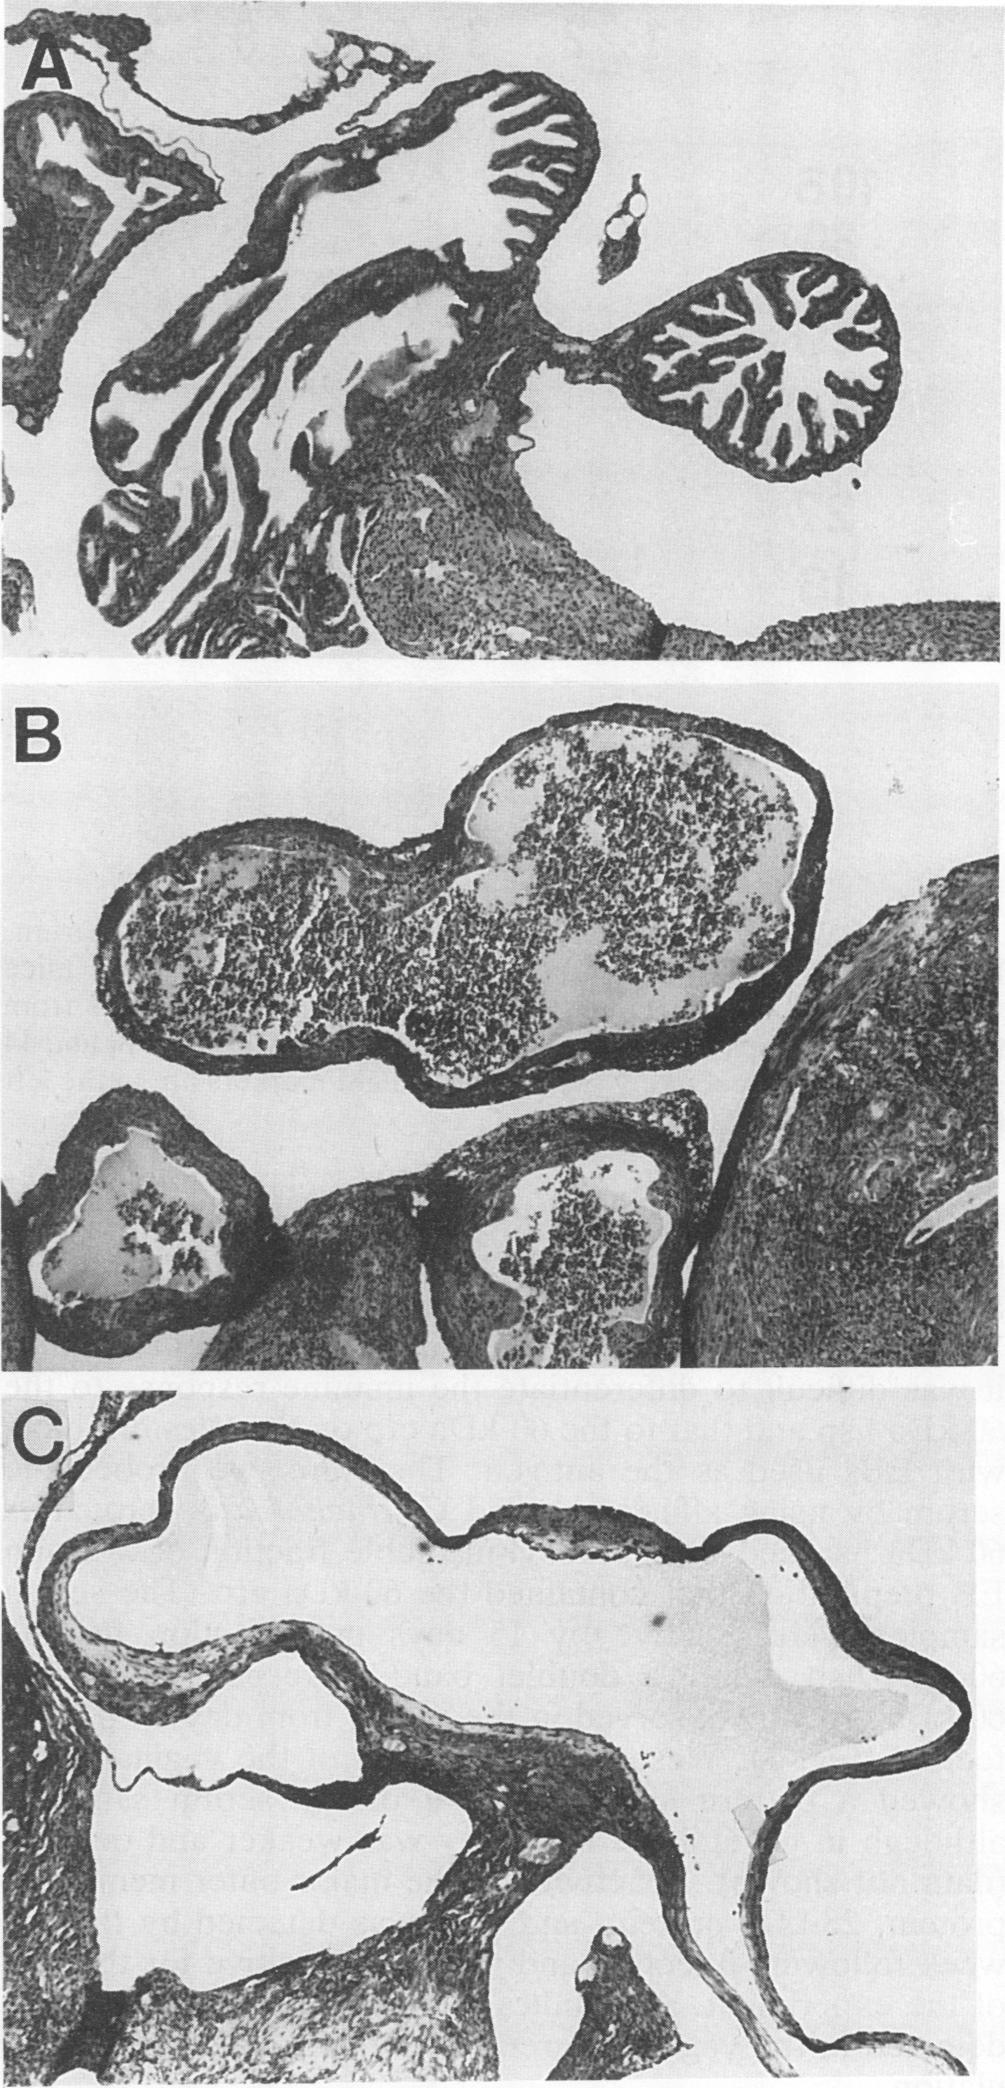 VOL. 61, 1993 TABLE 1. Culture and immunological results for mice infected with the C.